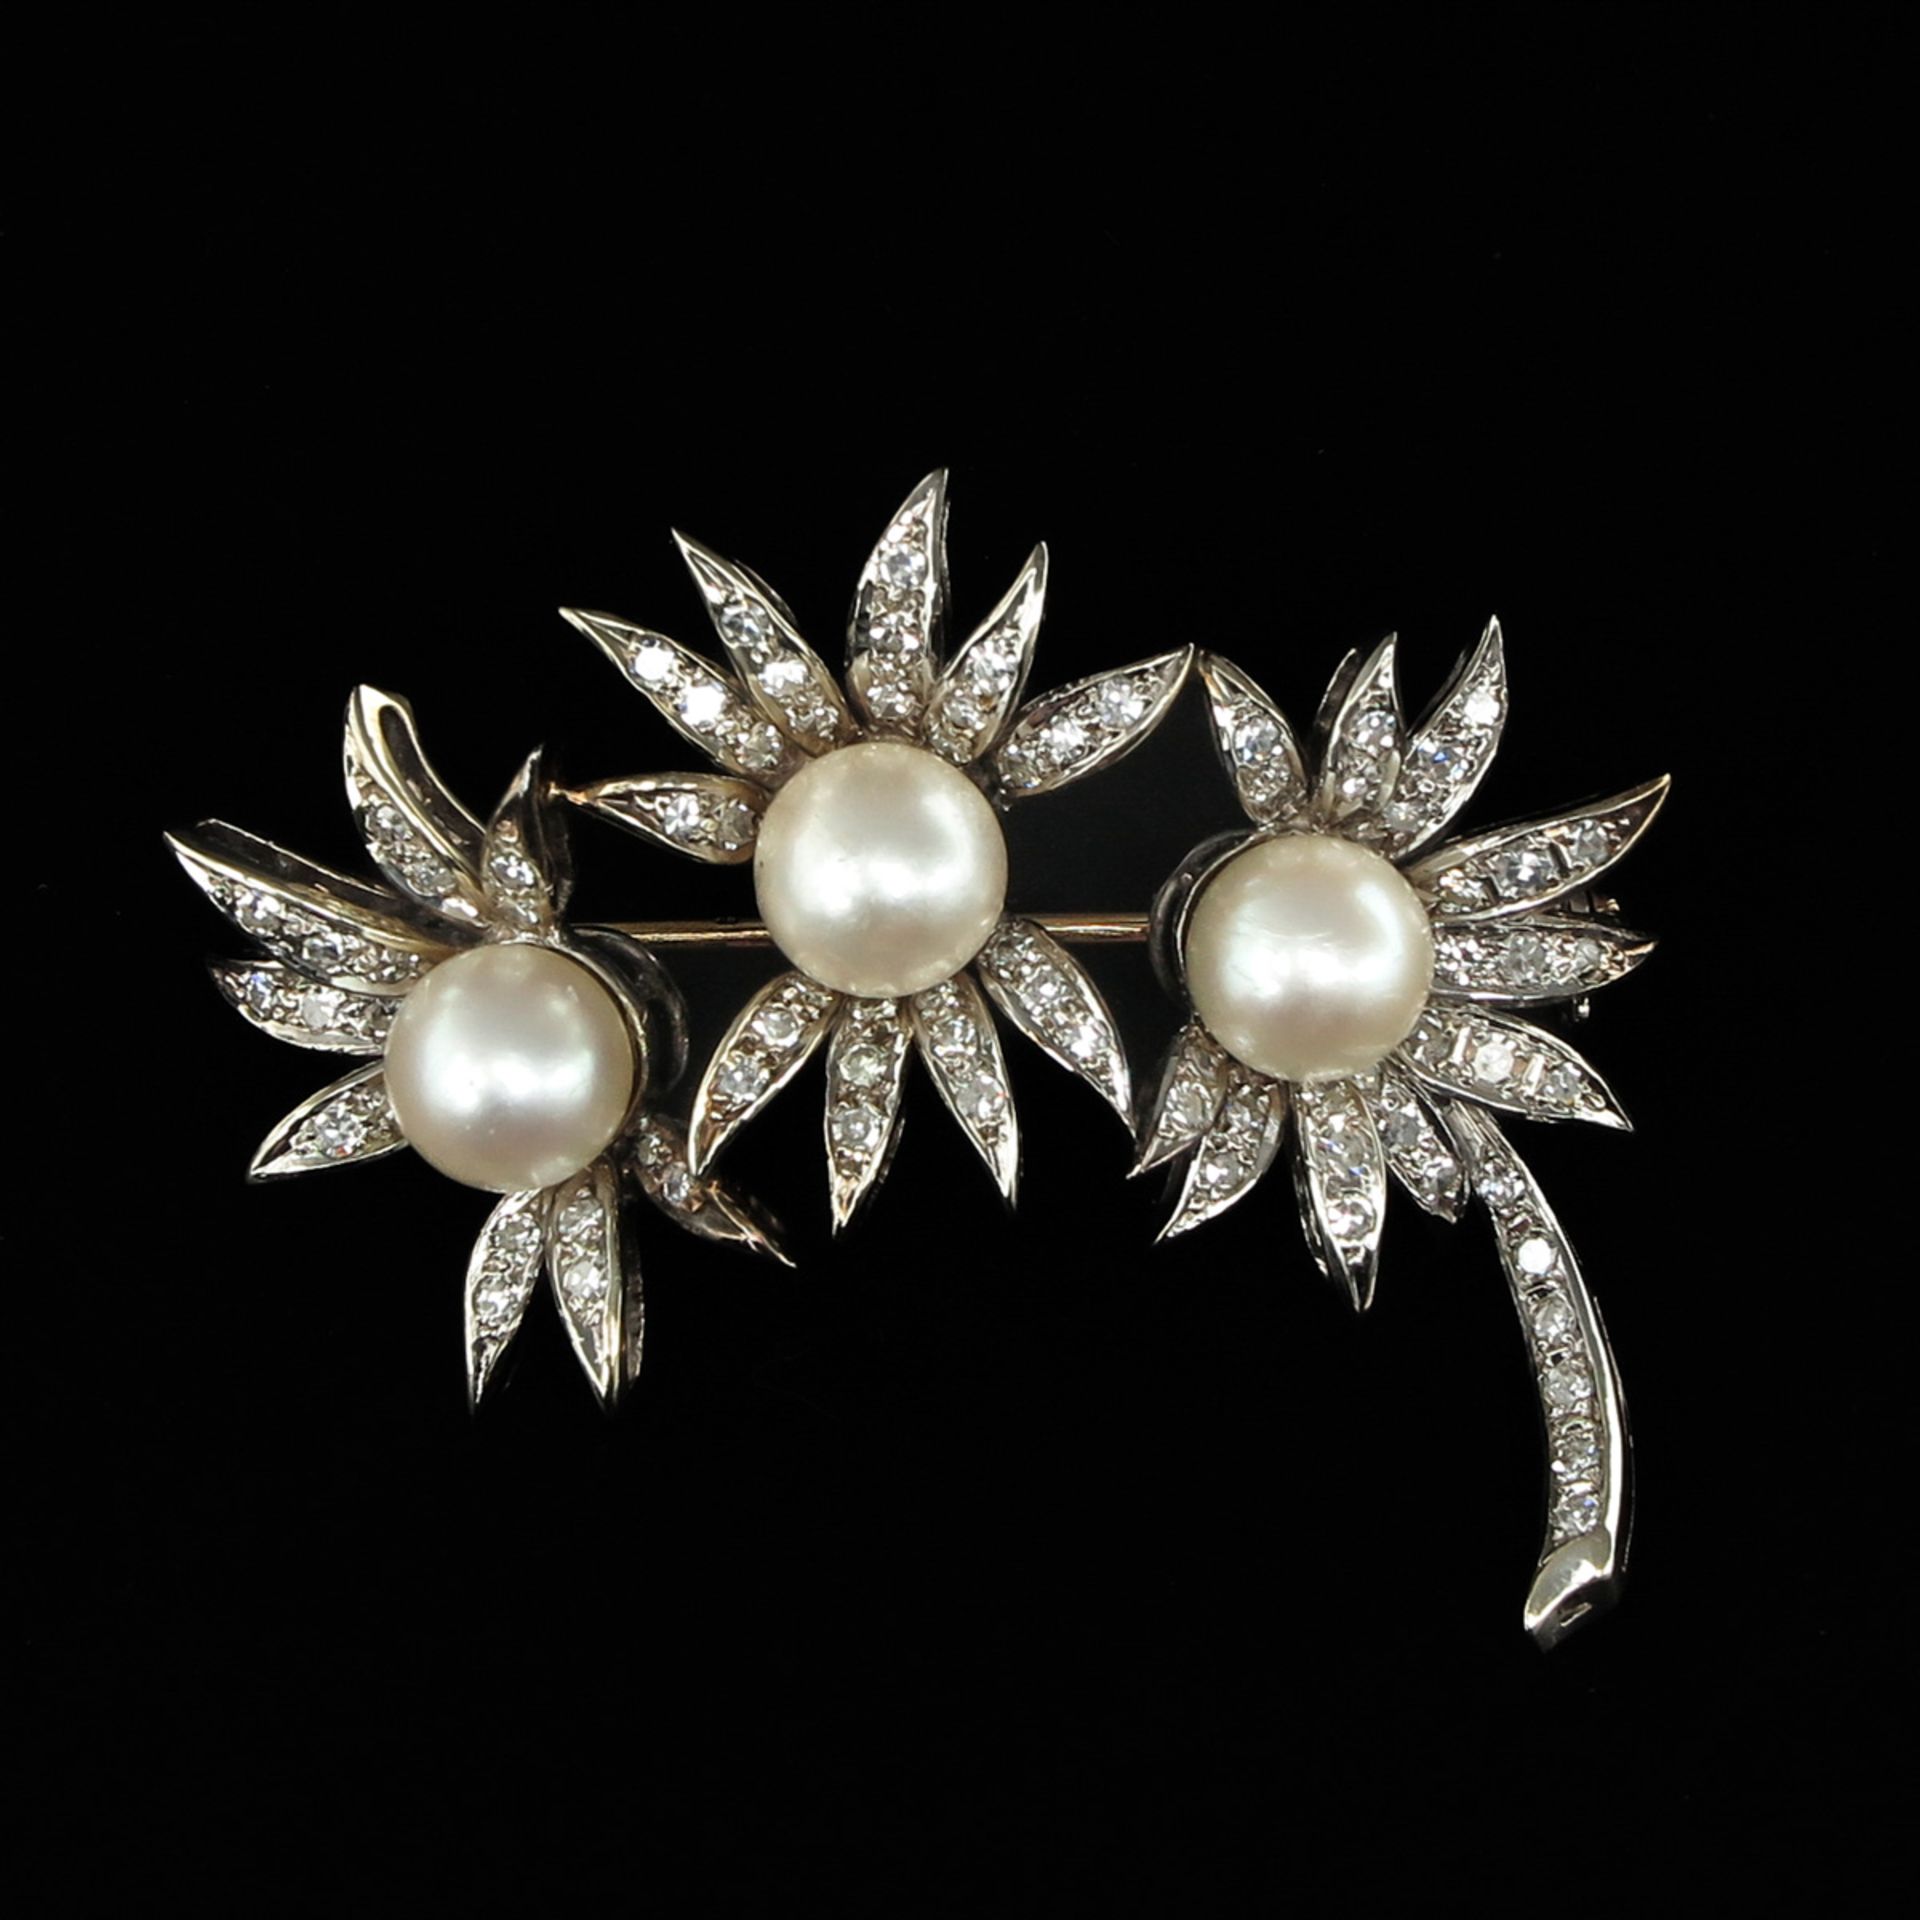 An 18KG Diamond and Pearl Brooch